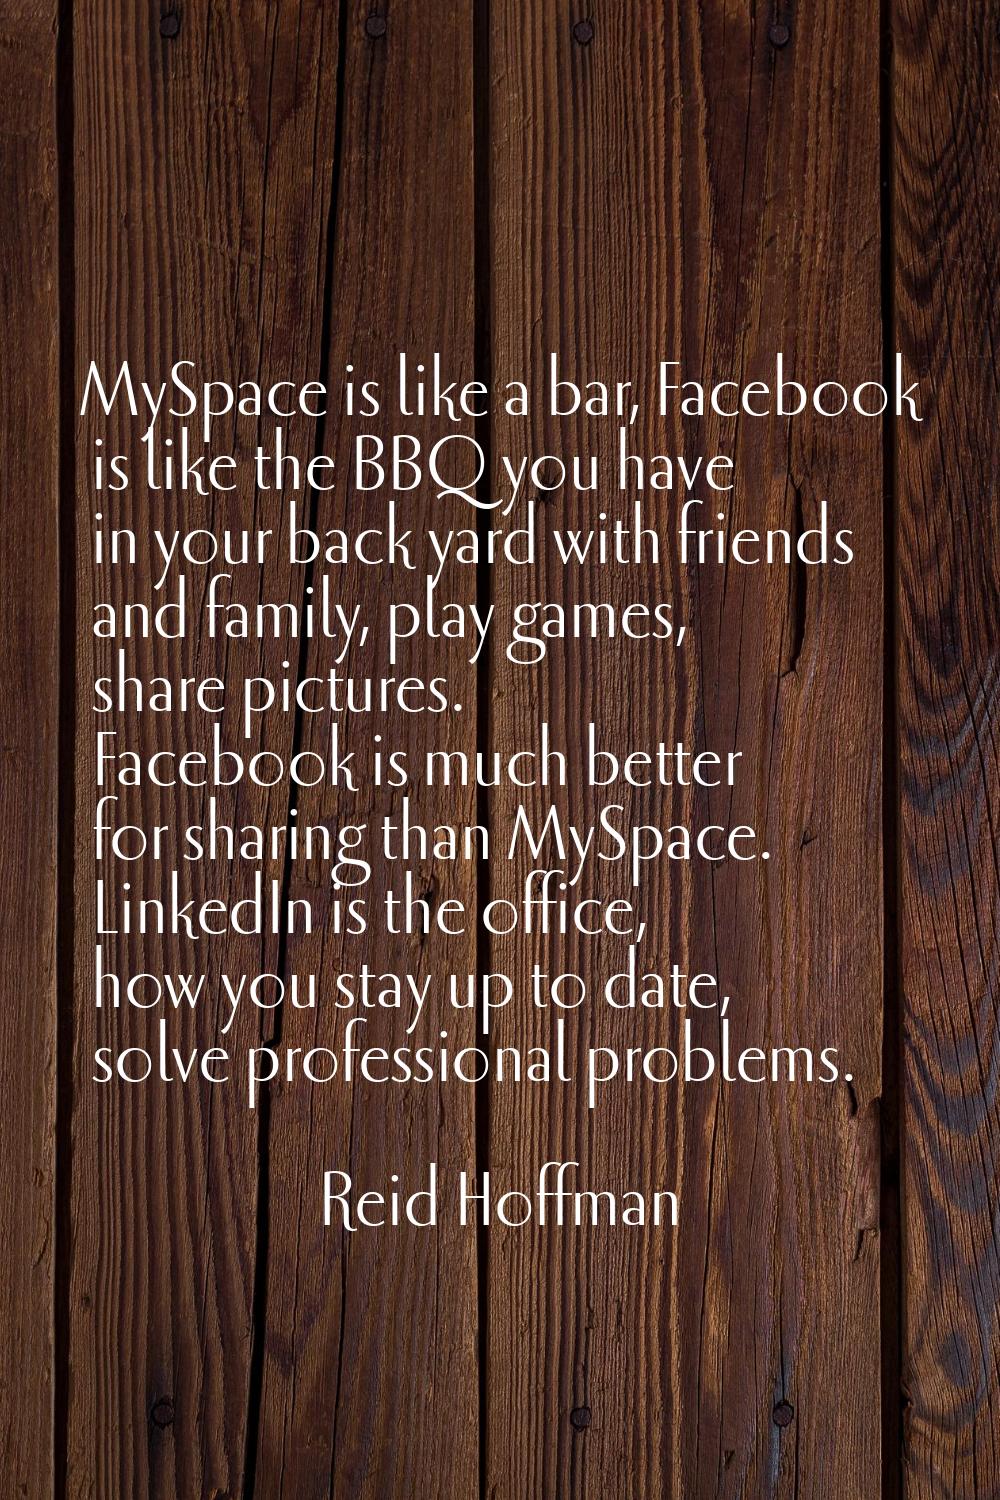 MySpace is like a bar, Facebook is like the BBQ you have in your back yard with friends and family,